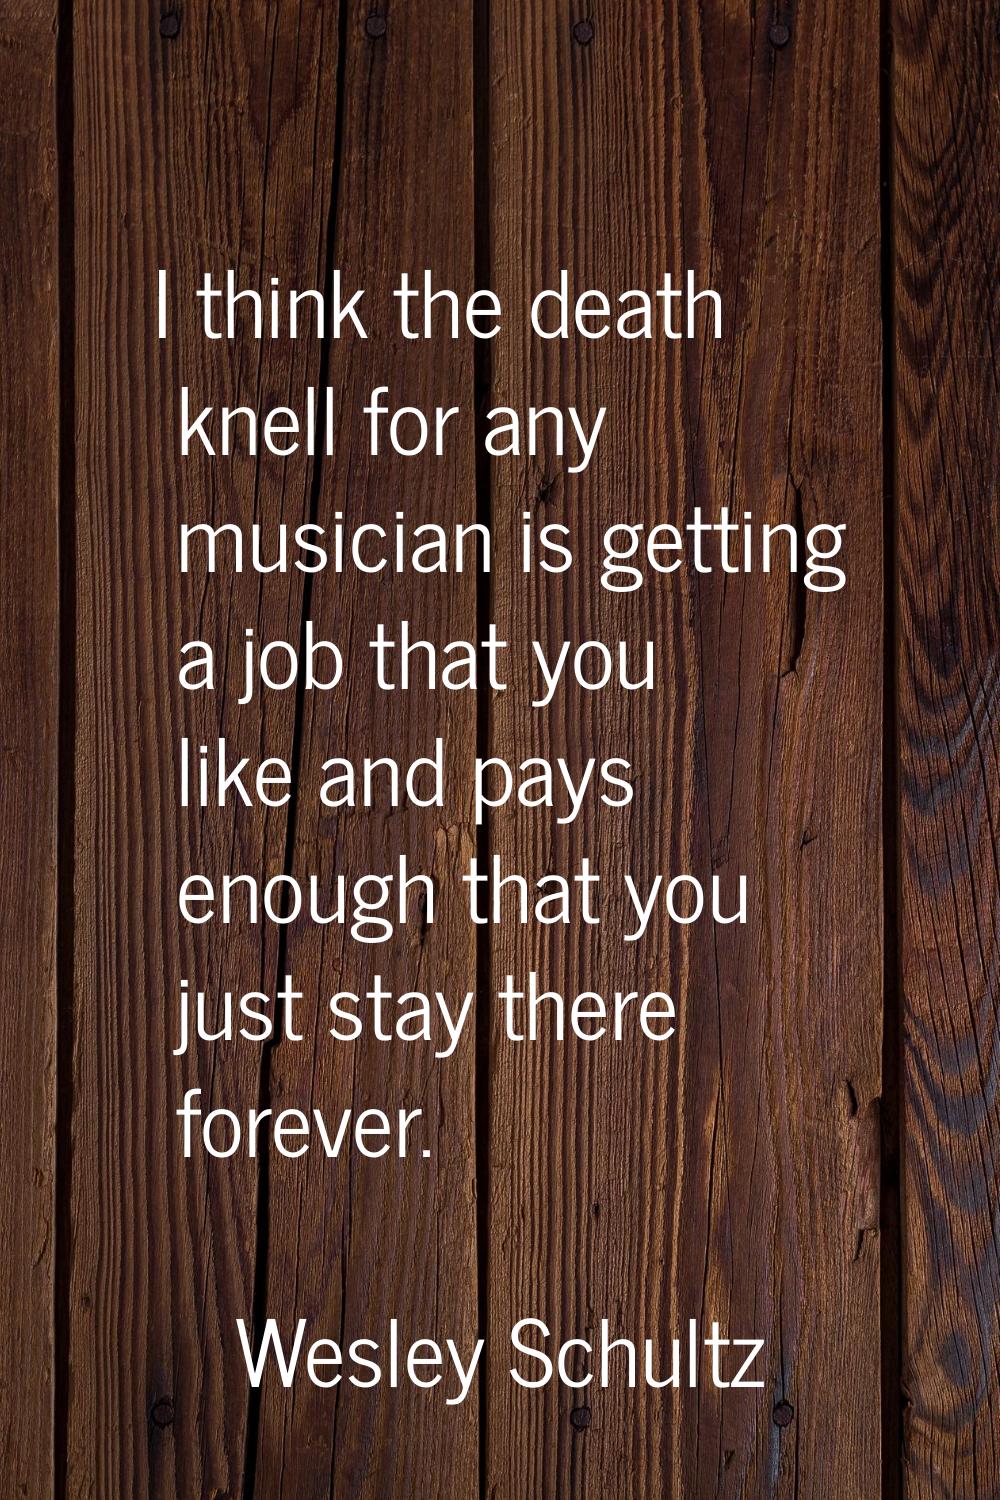 I think the death knell for any musician is getting a job that you like and pays enough that you ju